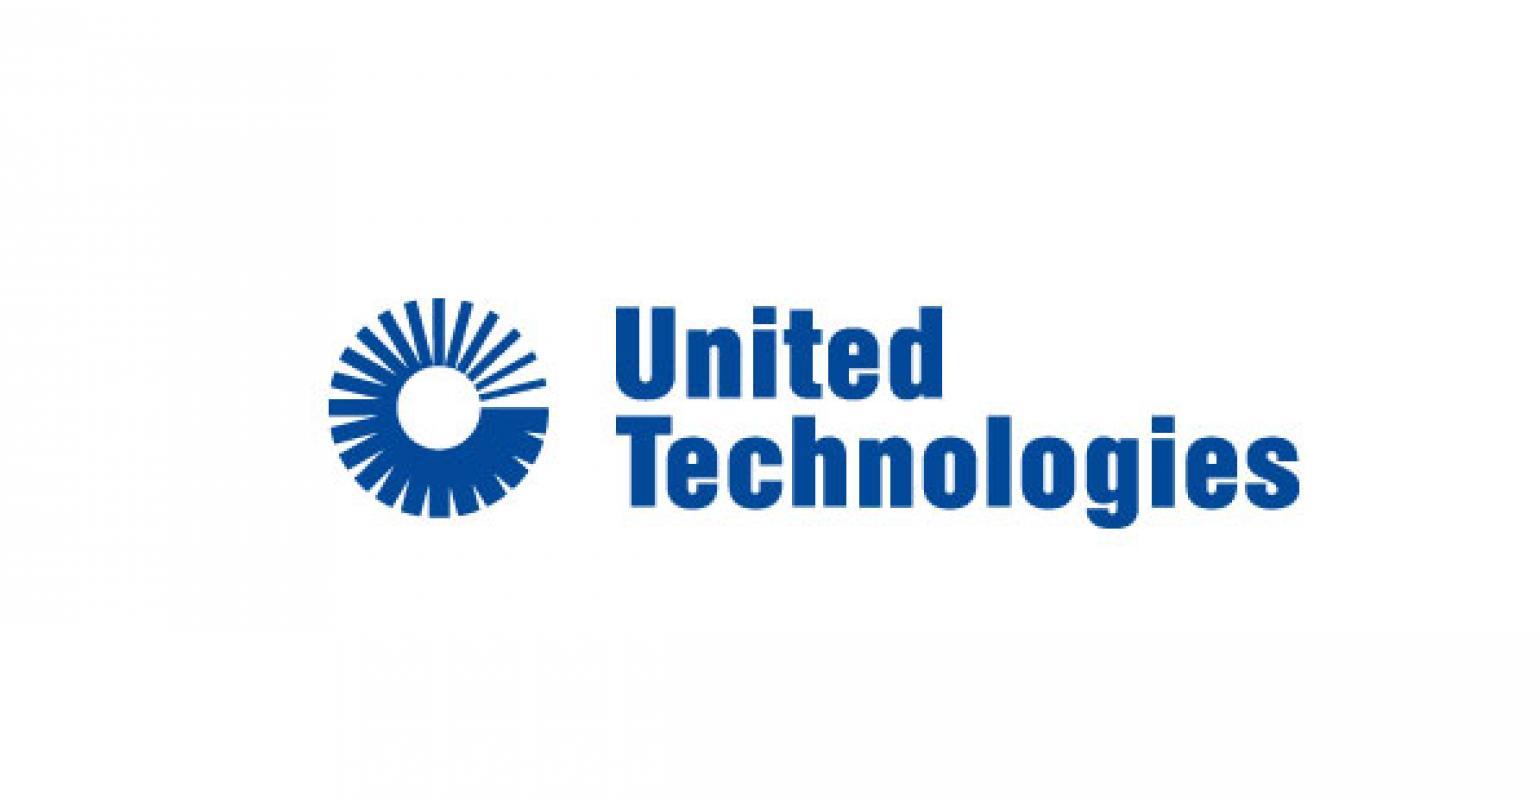 United Technologies Logo - United Technologies Transfers Pension Liabilities to Prudential